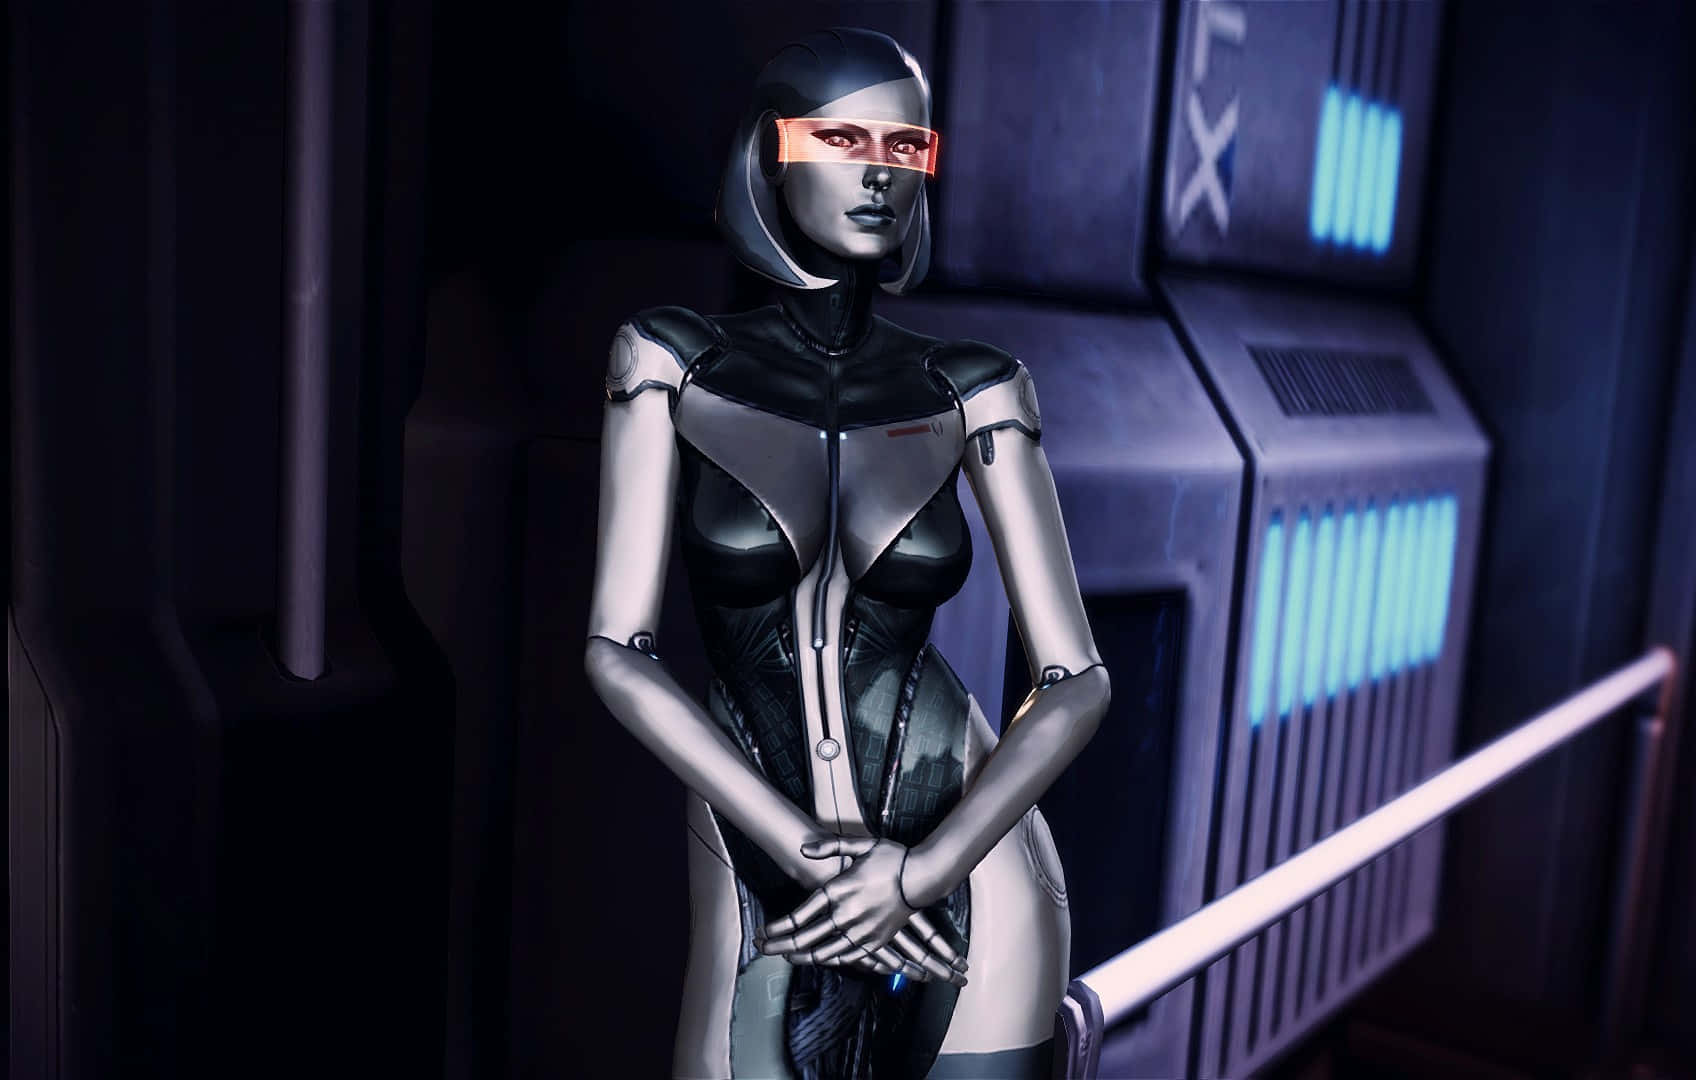 EDI, the advanced AI in Mass Effect Universe, portrayed in front of a vibrant interstellar backdrop Wallpaper